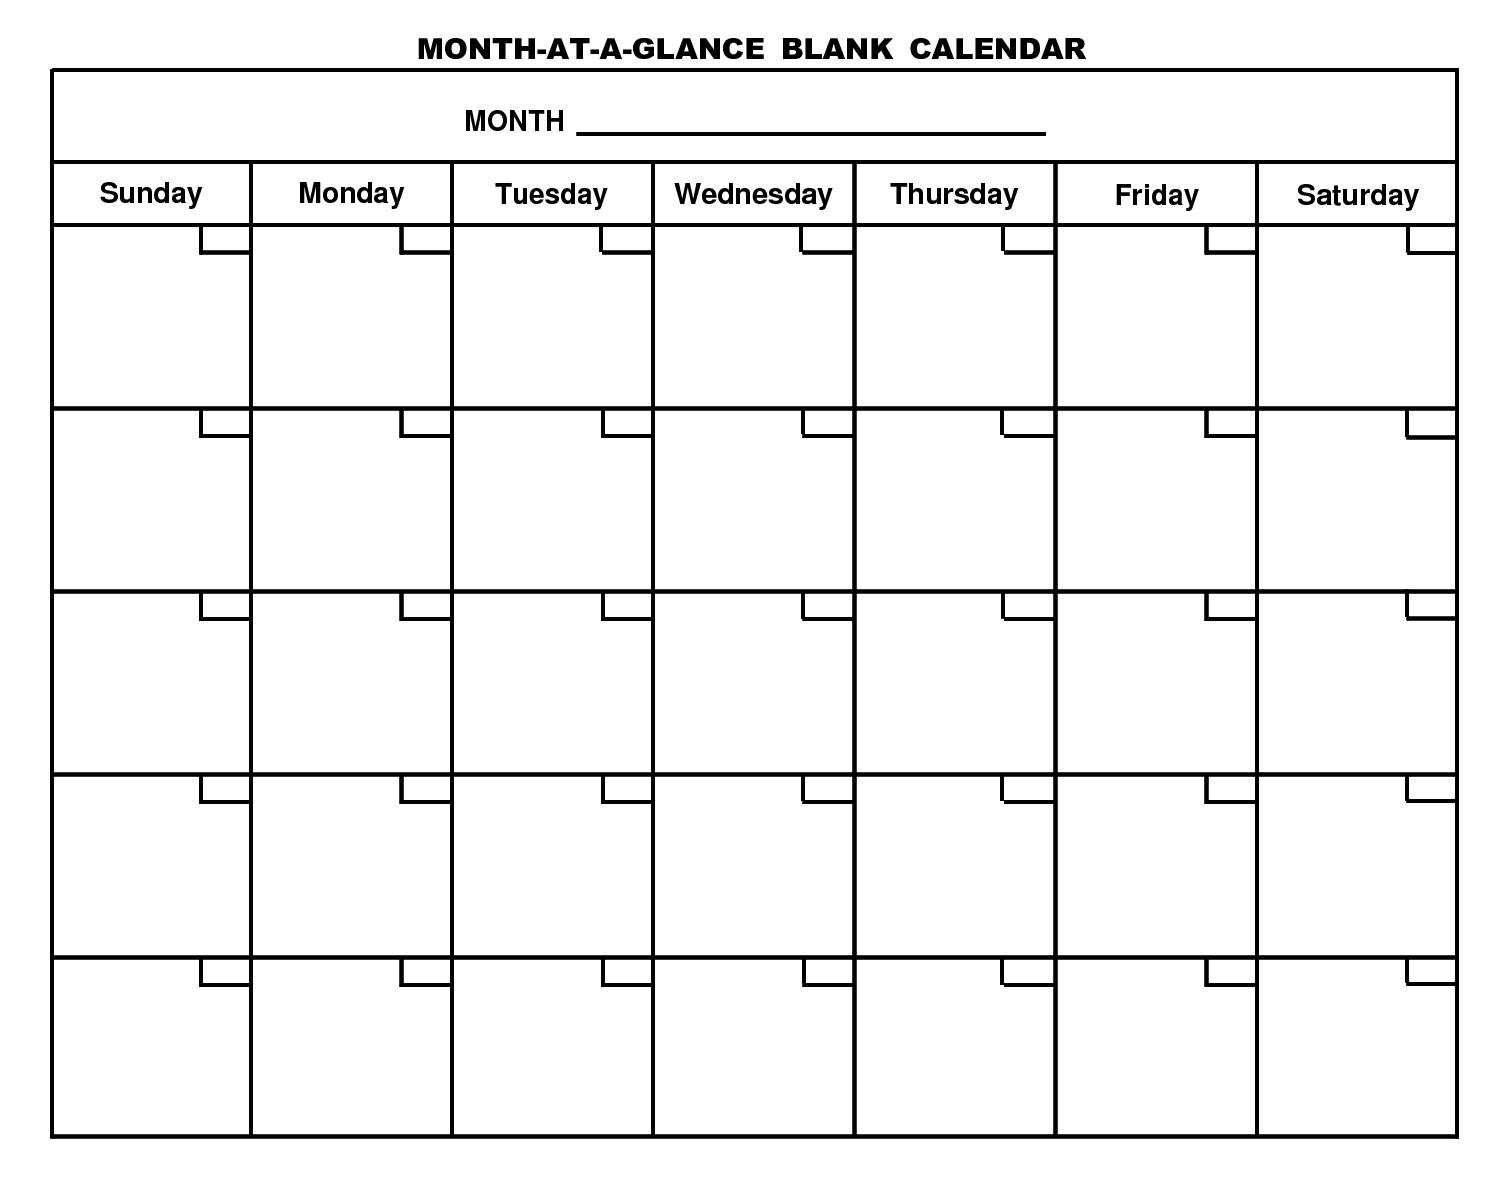 Month At A Glance Blank Calendar Template – Dalep.midnightpig.co Pertaining To Month At A Glance Blank Calendar Template